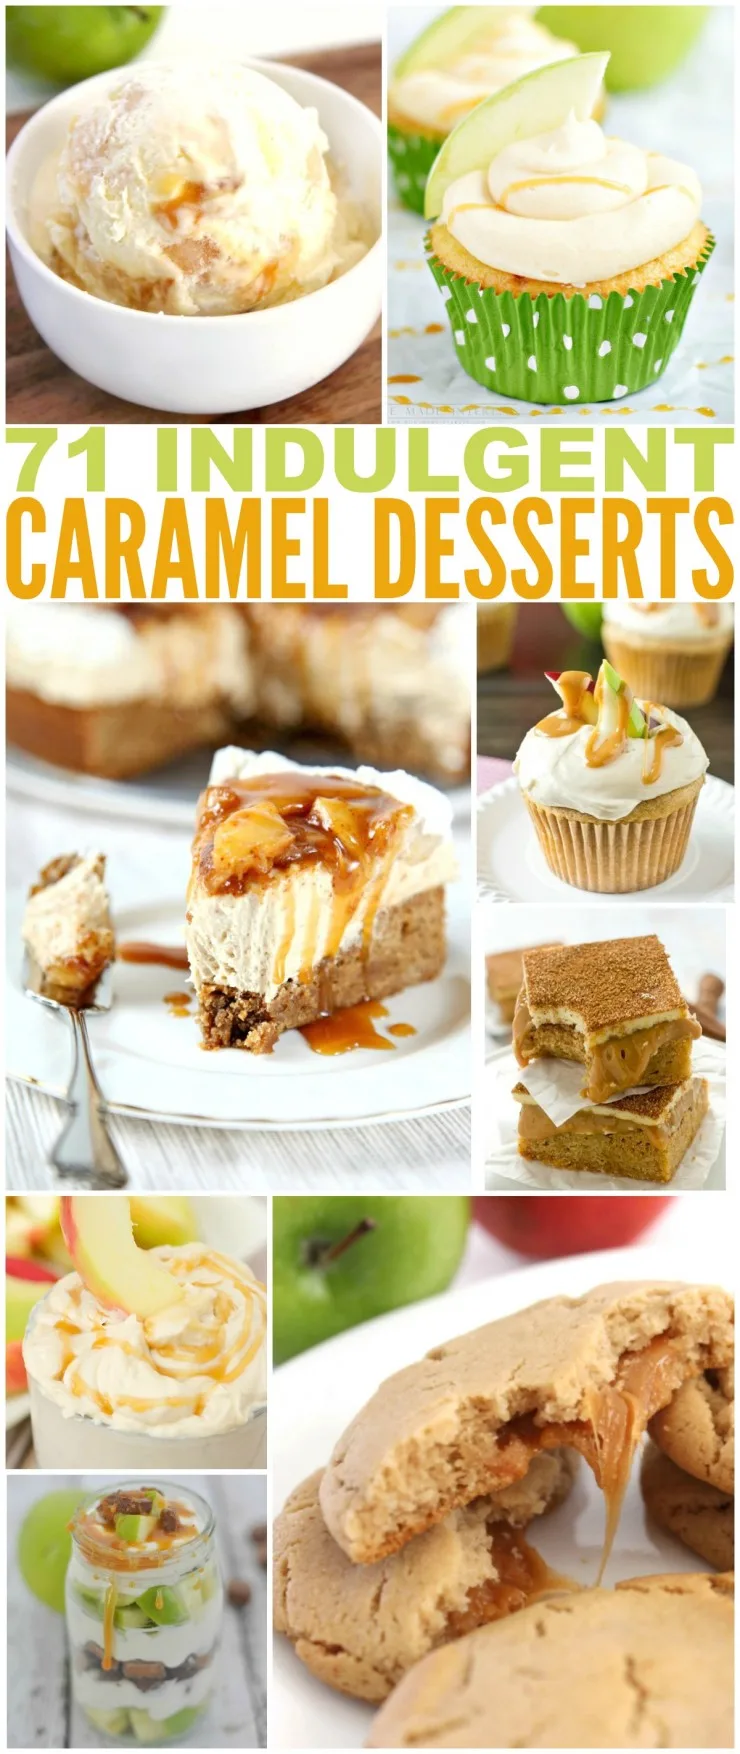 Gooey, buttery, sweet caramel recipes take a starring role in these 71 indulgent caramel dessert recipes. Dessert has never tasted so good!